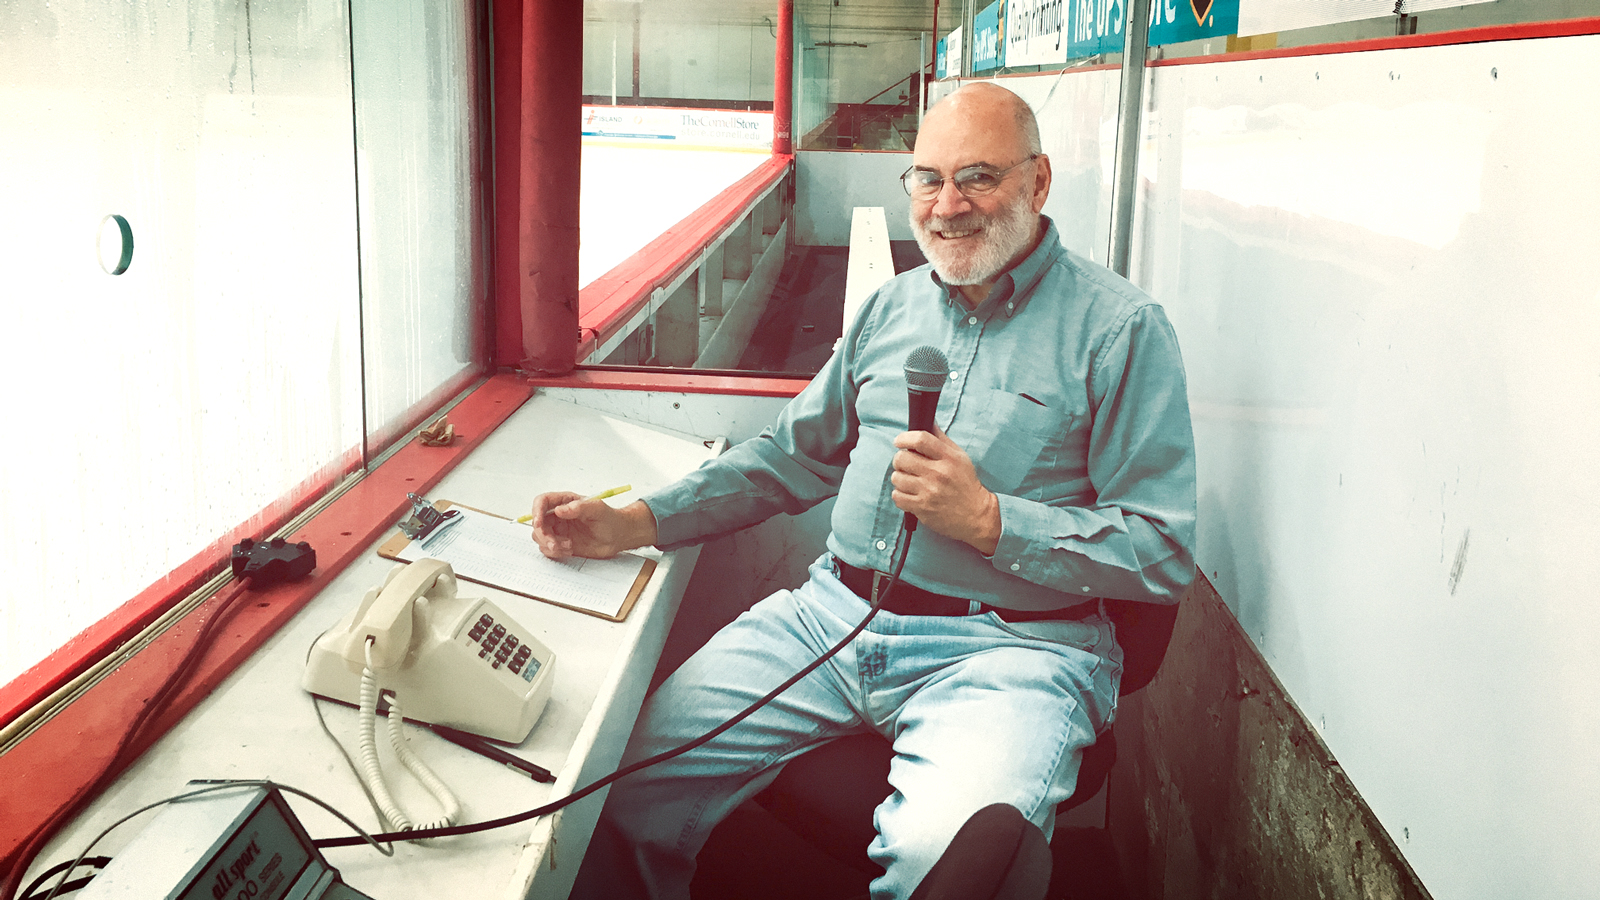 Cornell men's hockey announcer Arthur Mintz in the announcer's booth with a microphone.